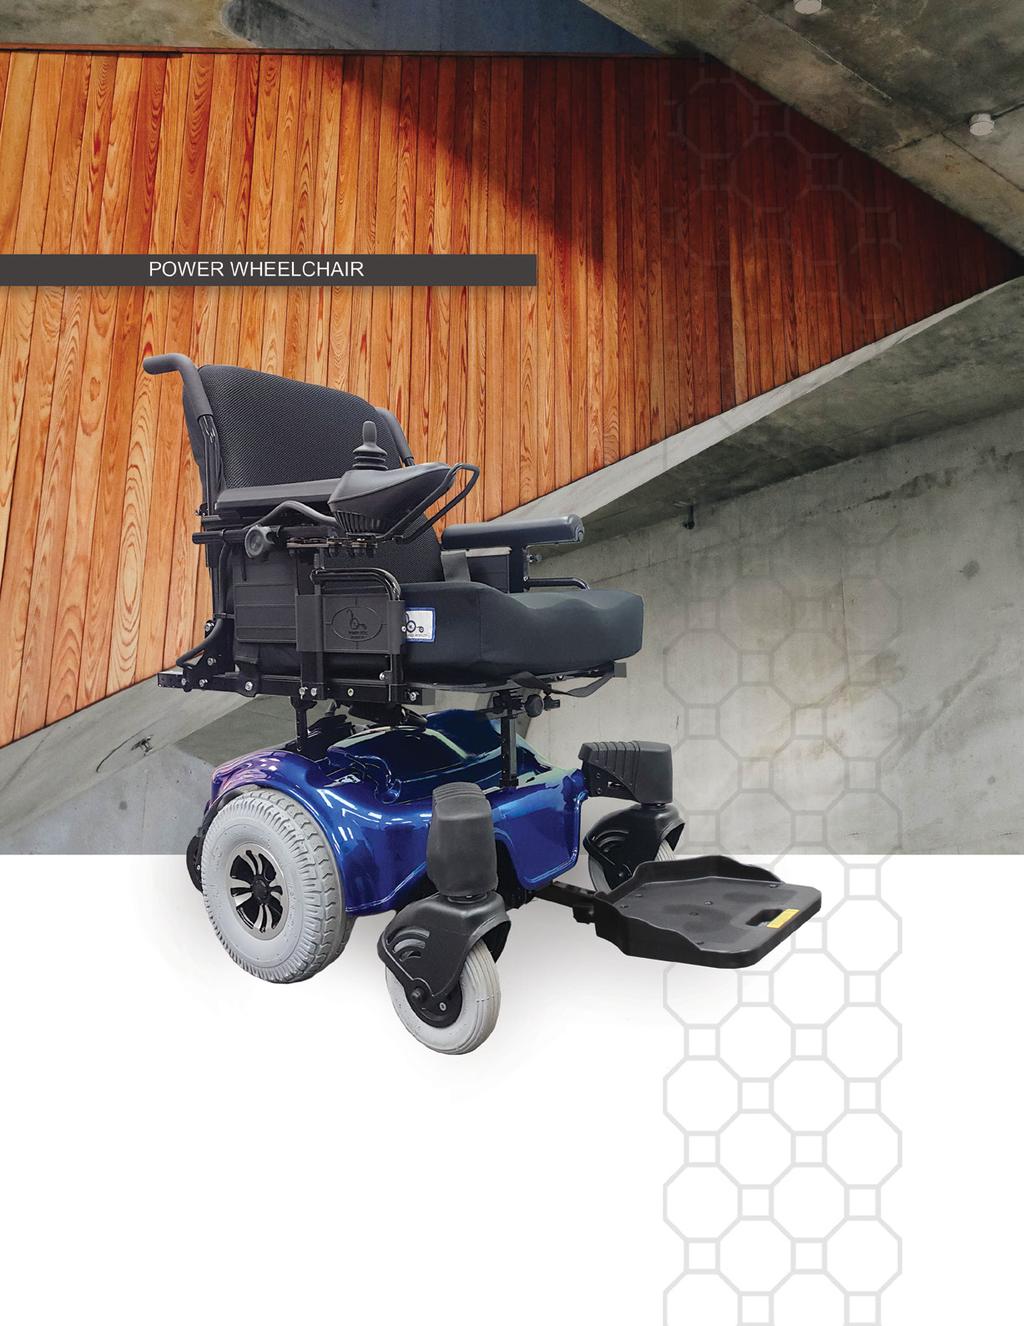 mp5 The MP5 wheelchair will provide the power and maneuverability wherever it is used.